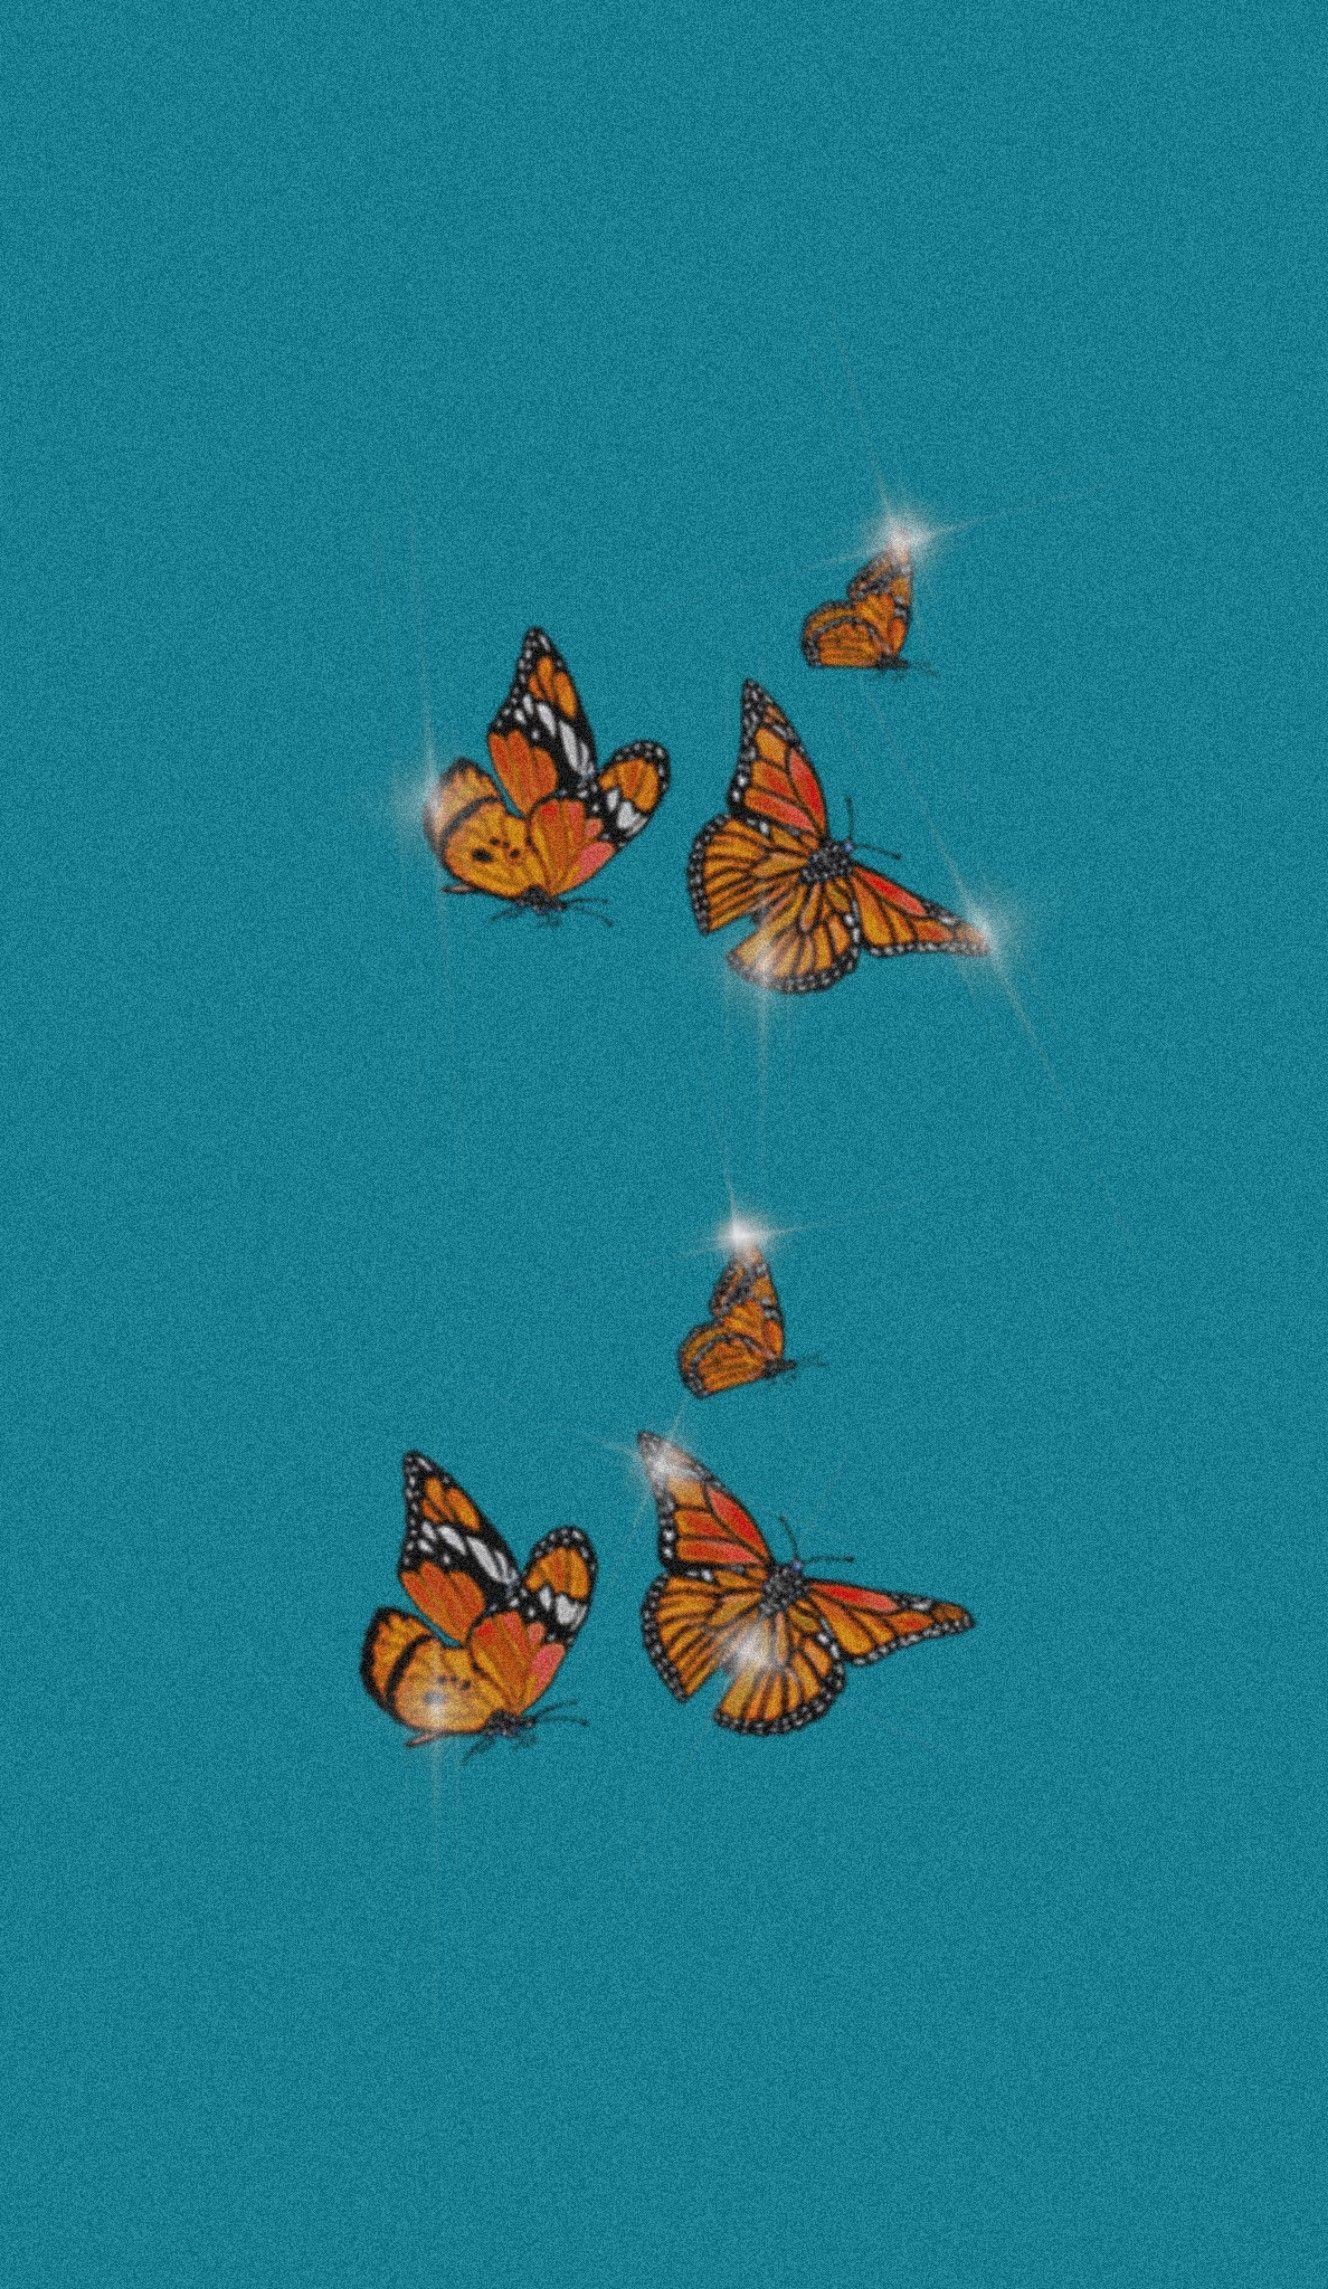 Bling Butterfly Wallpapers Top Free Bling Butterfly Backgrounds Wallpaperaccess